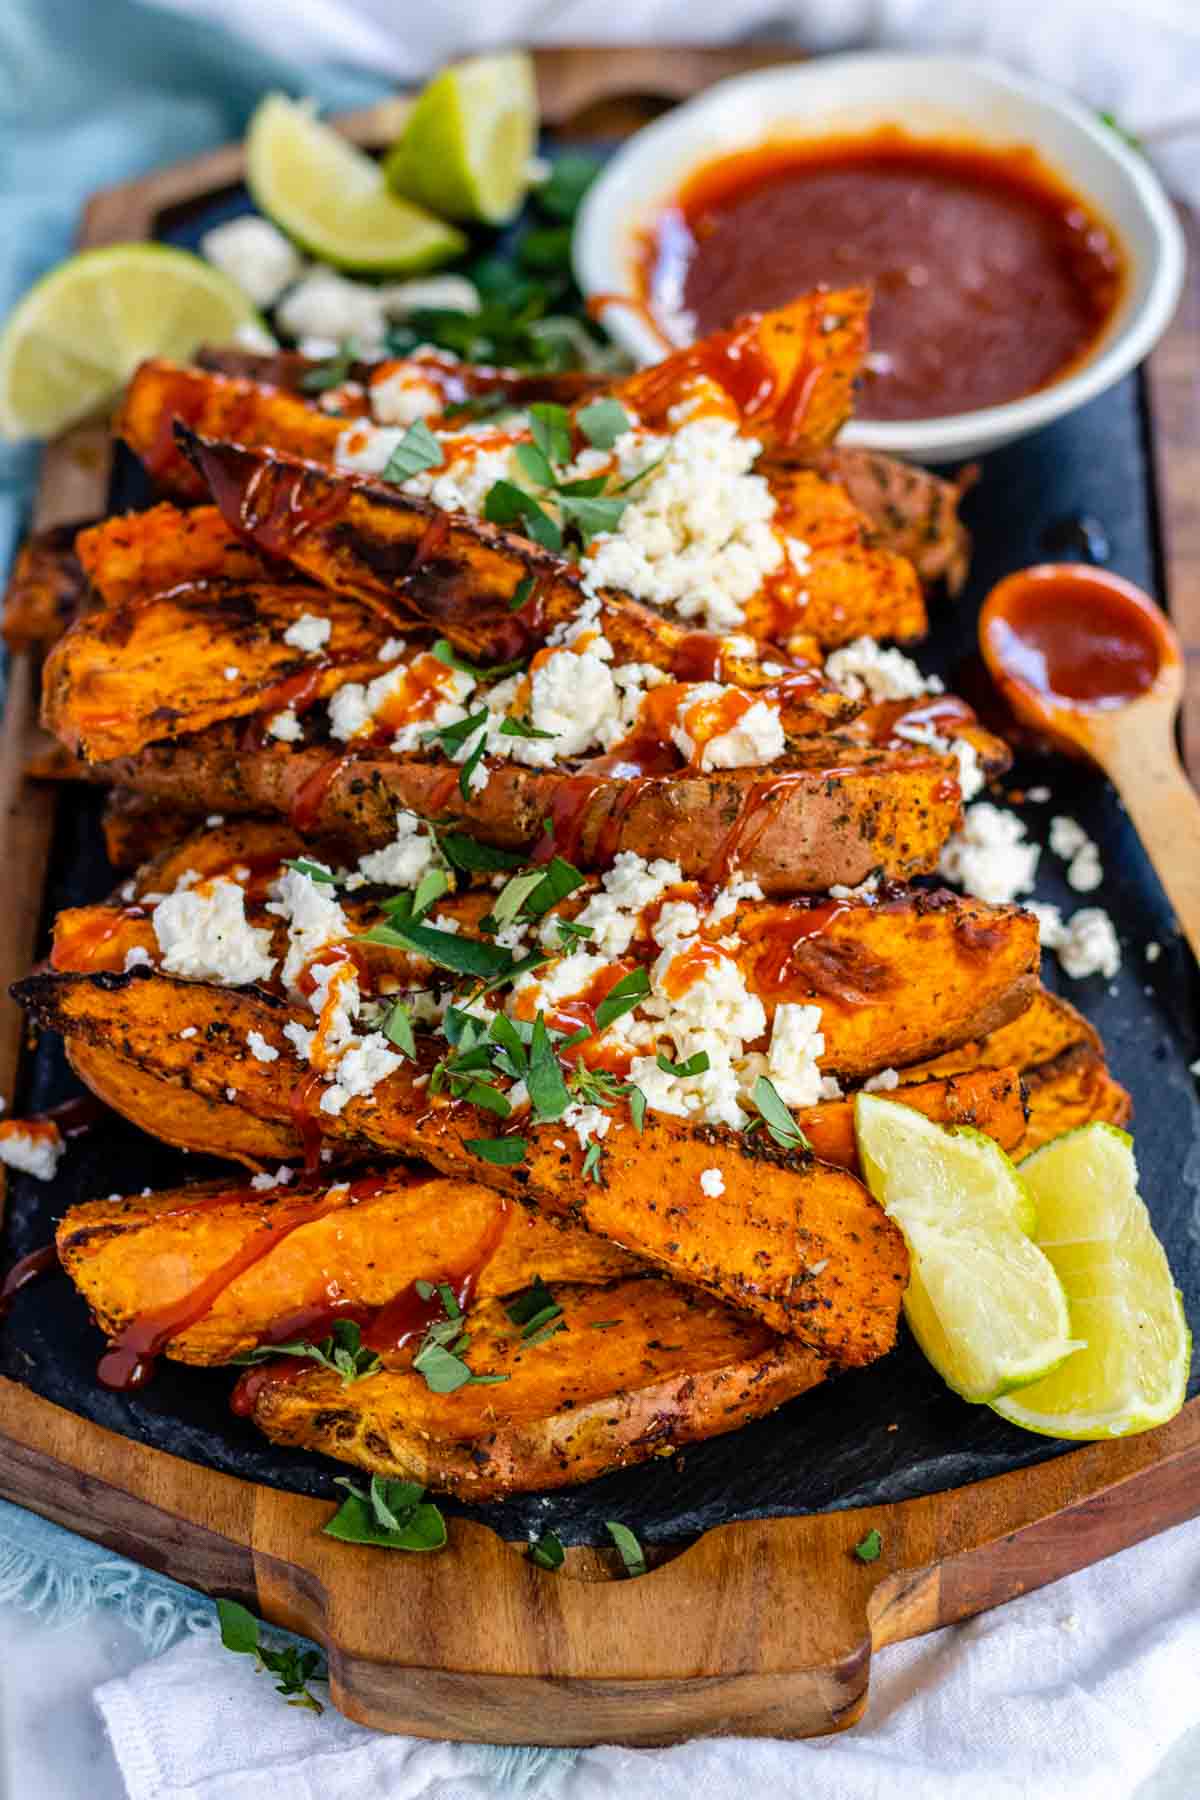 Baked sweet potato wedges on a black slate platter, covered in feta, fresh oregano, and a drizzle of red sauce.